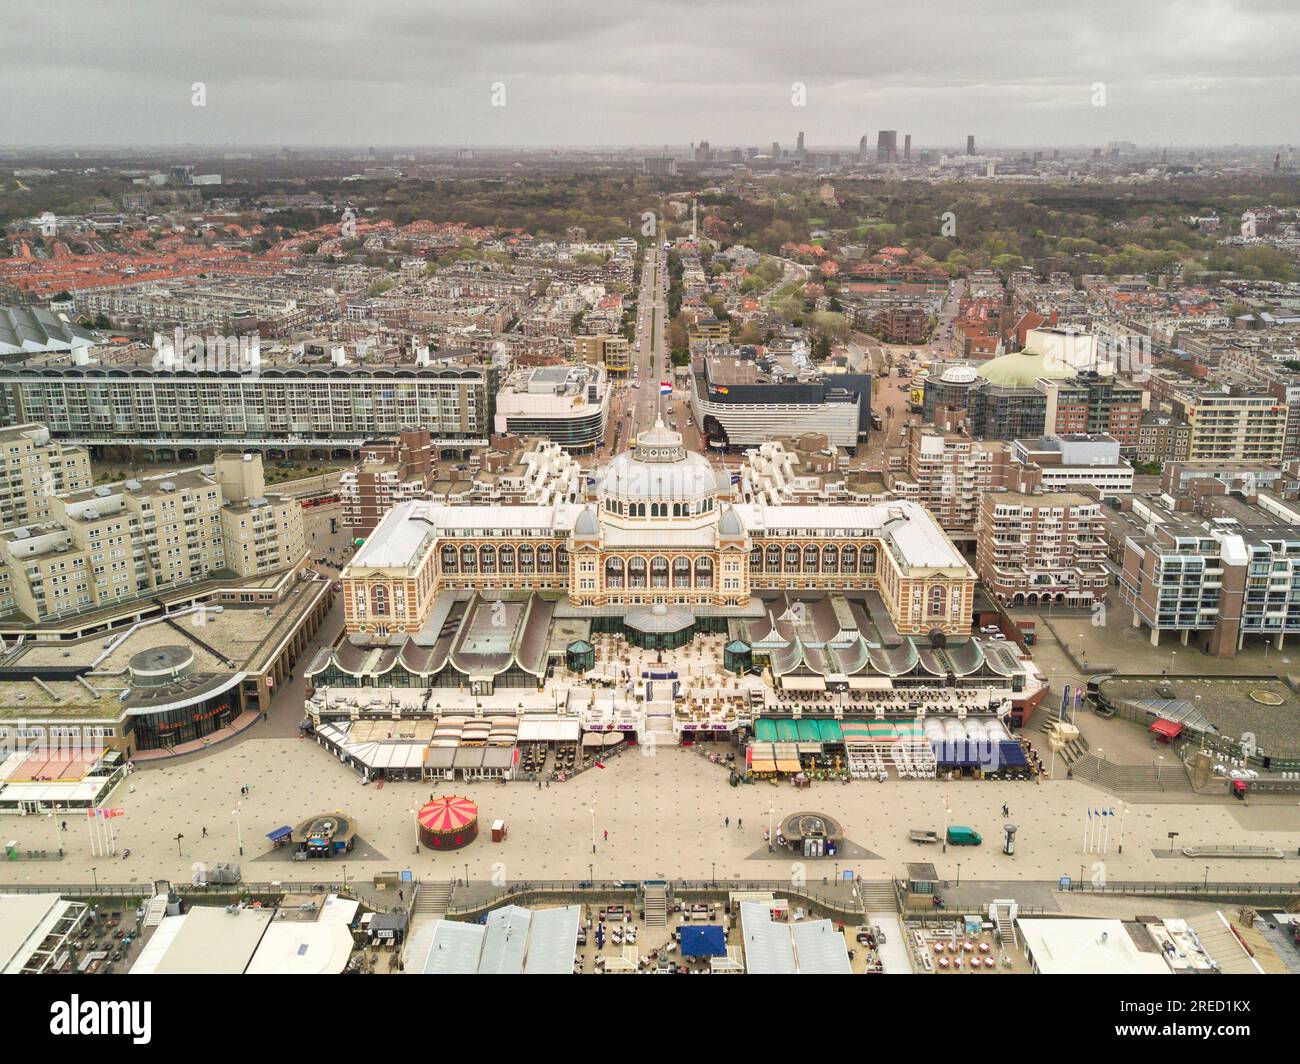 Aerial of the famous Kurhaus hotel with The Hague in the background. Stock Photo